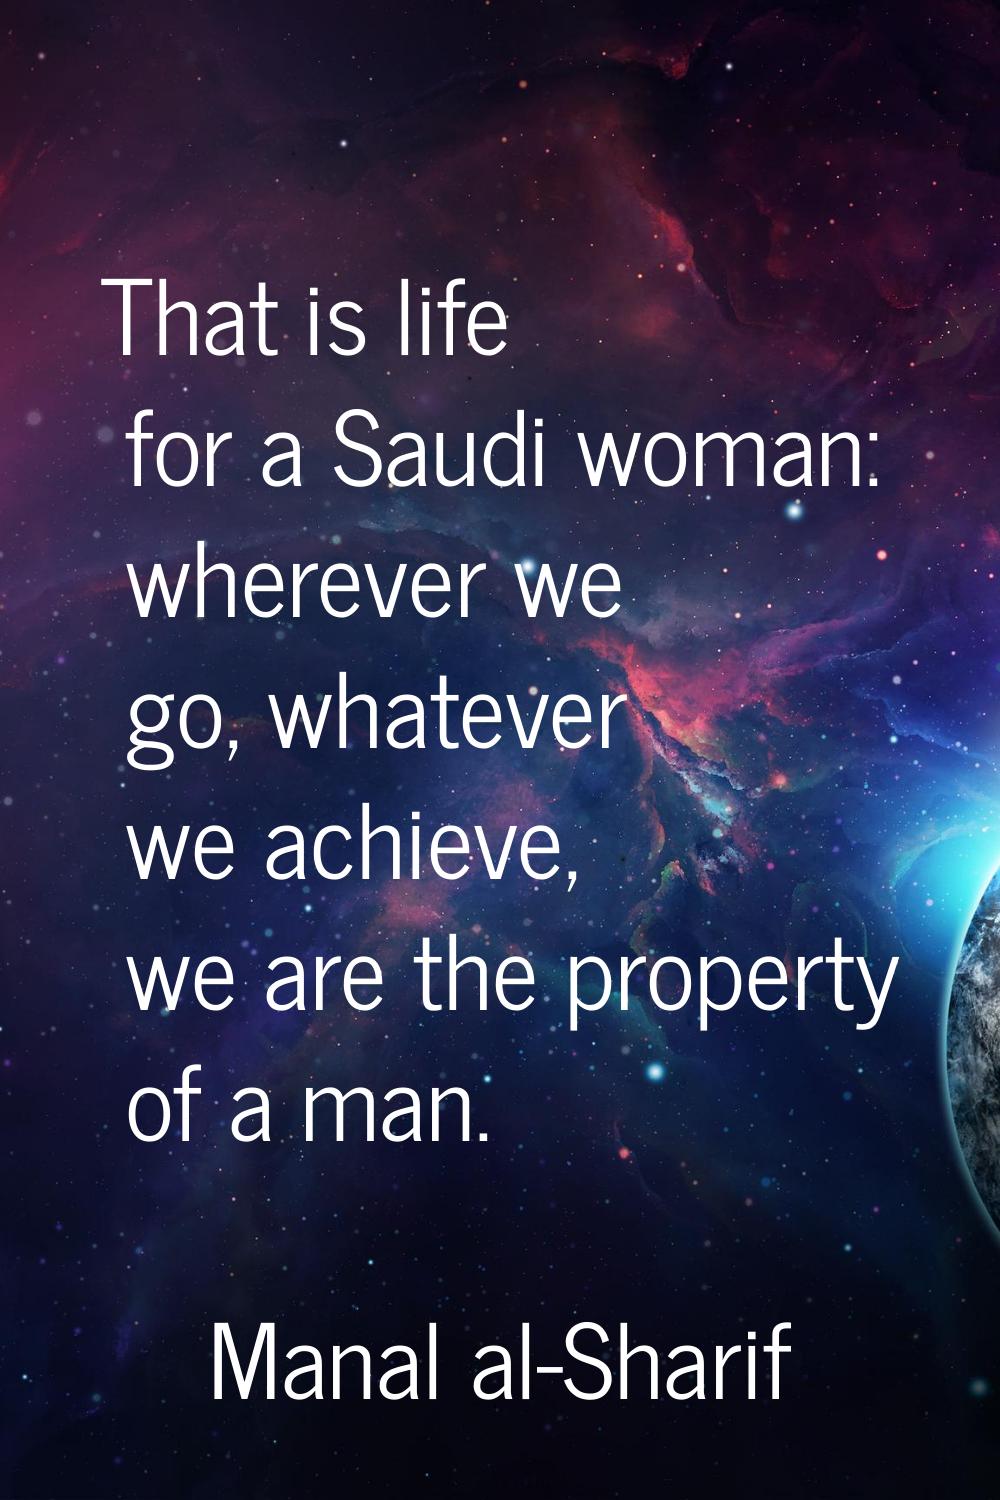 That is life for a Saudi woman: wherever we go, whatever we achieve, we are the property of a man.